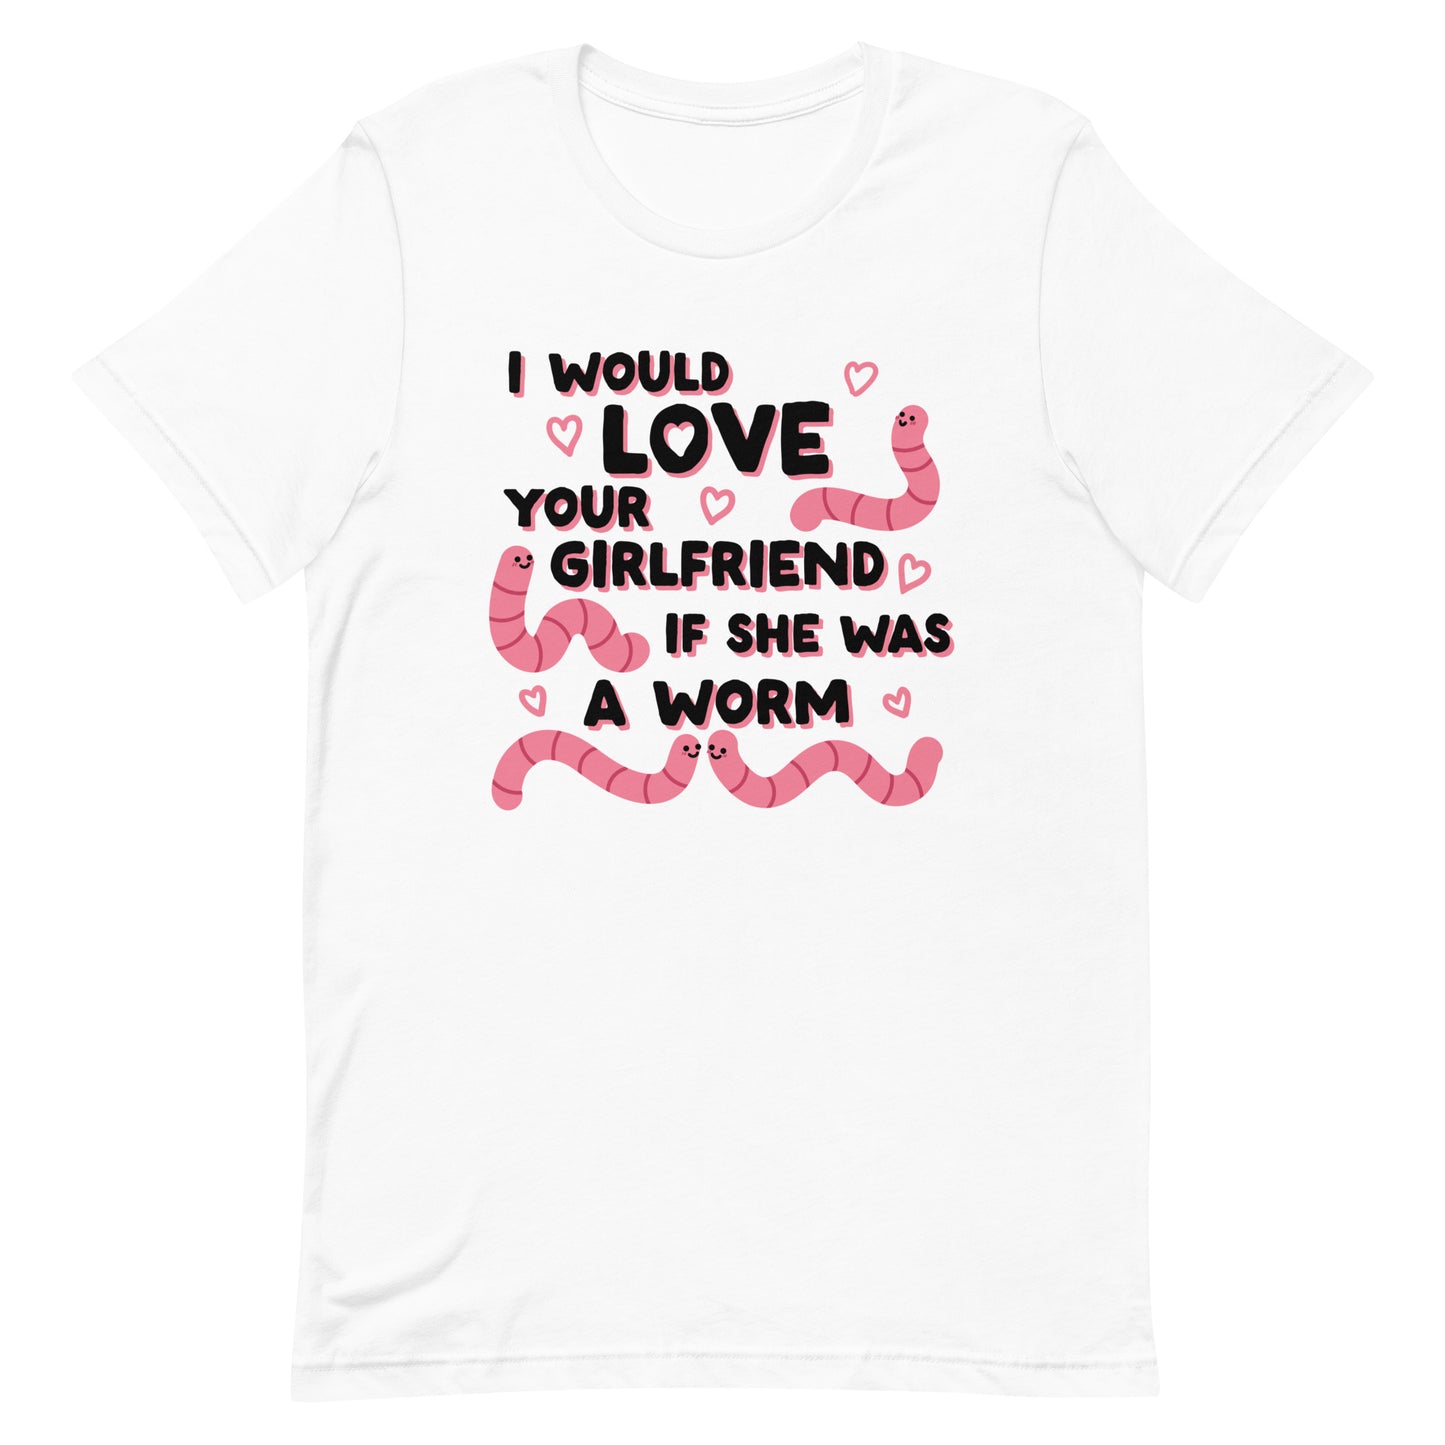 A white crewneck t-shirt featuring text that reads "I would love your girlfriend if she was a worm". Cute cartoon worms and hearts surround the text.